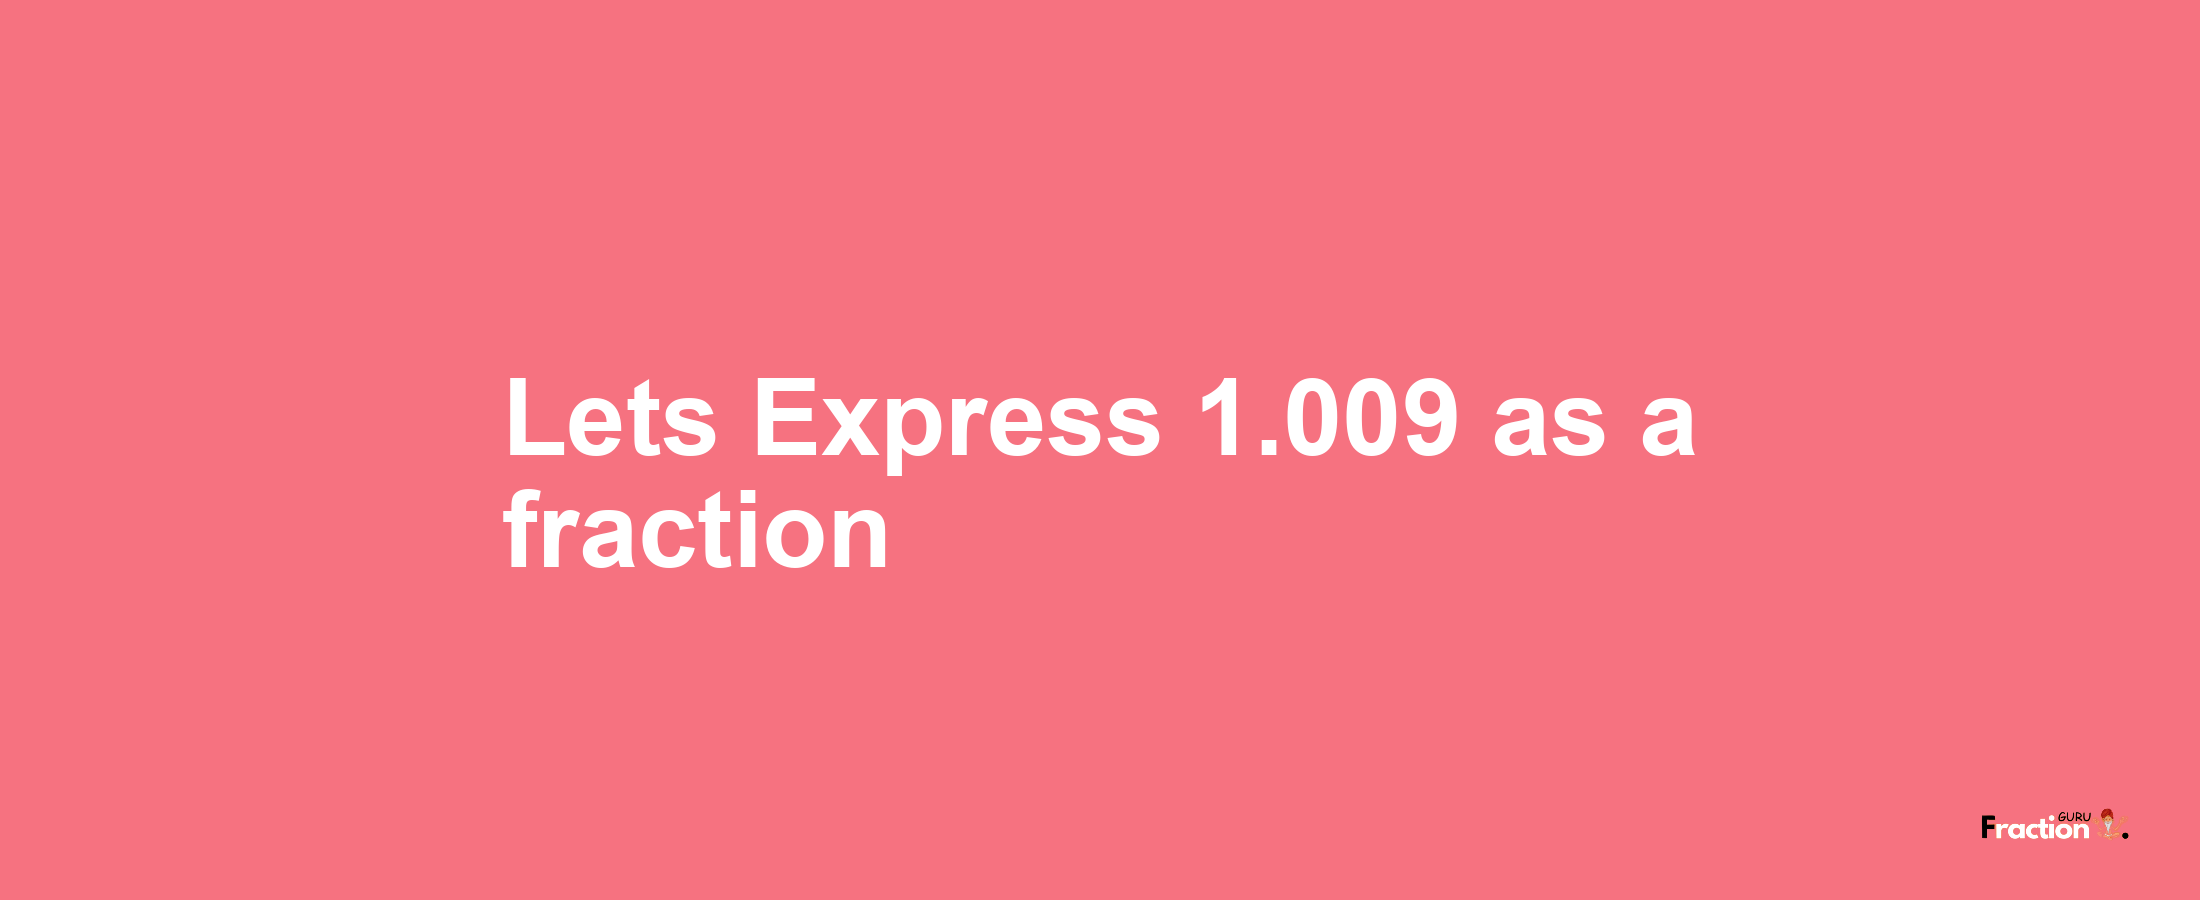 Lets Express 1.009 as afraction